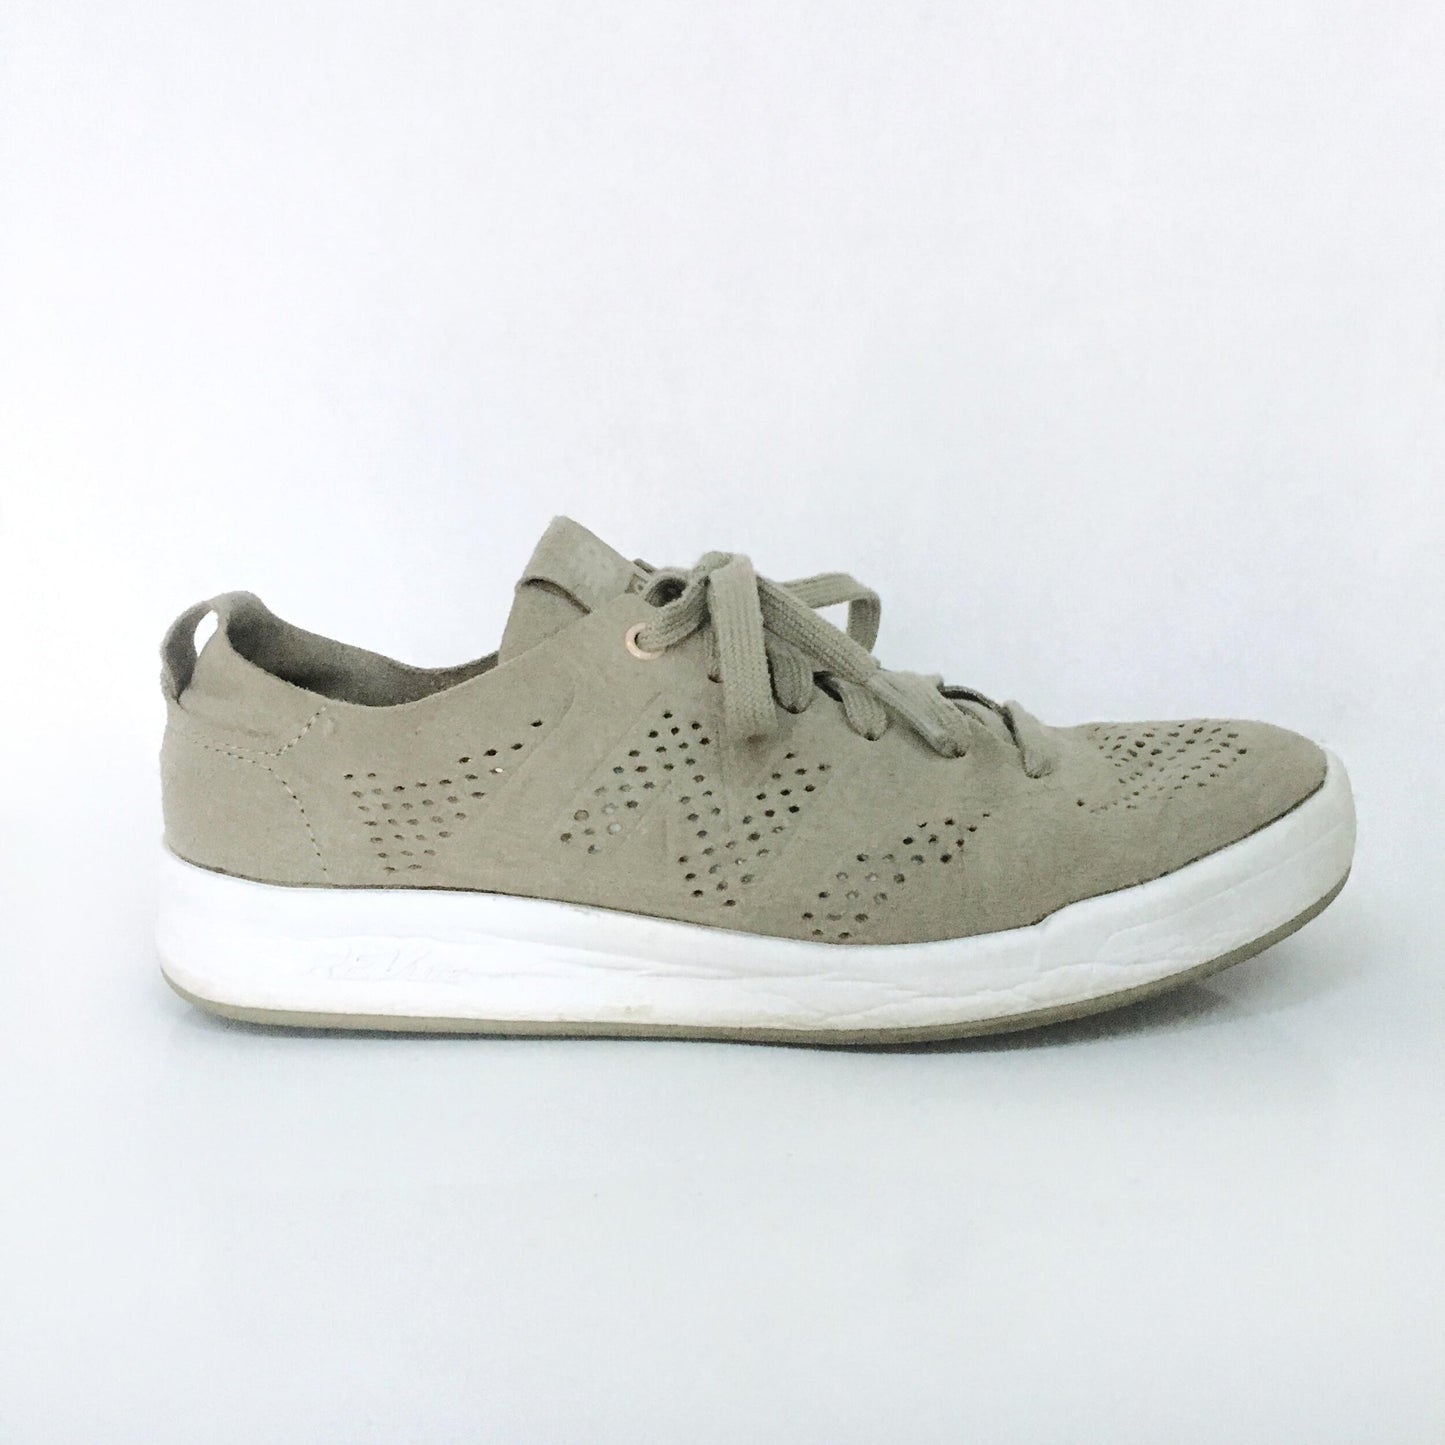 New Balance Suede Summer Sneaker - size 8.5